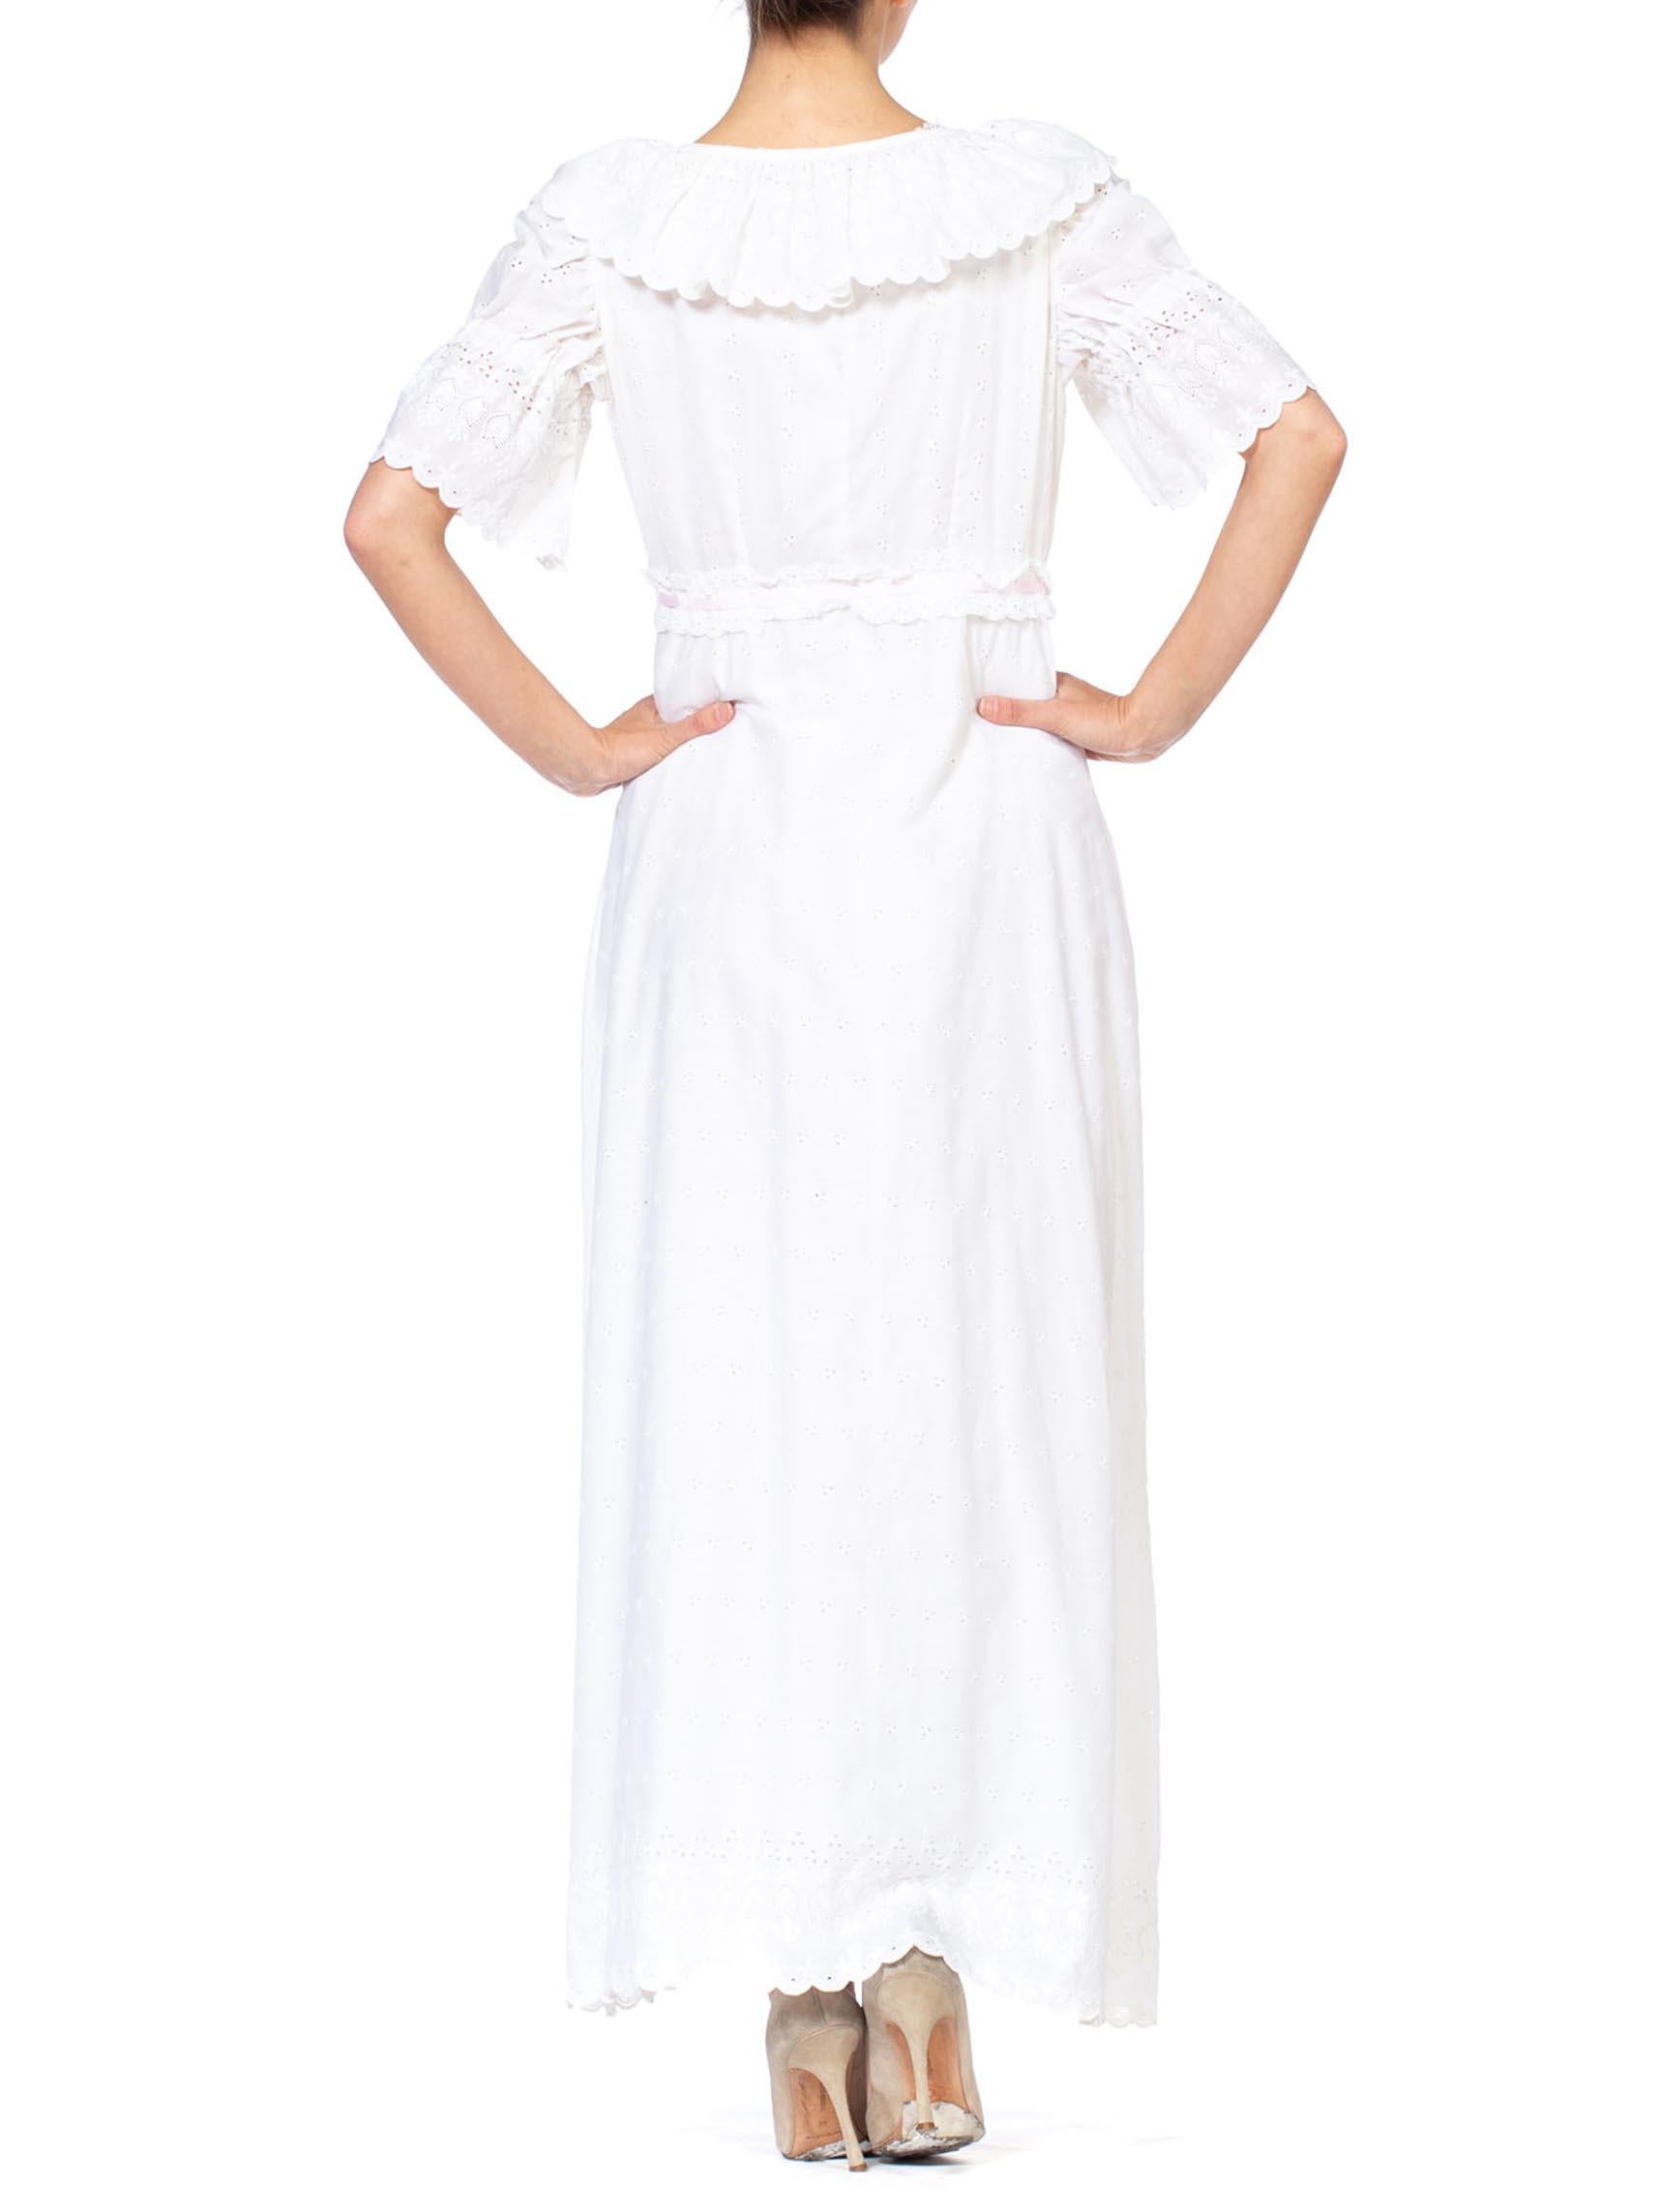 Gray 1970S White Embroidered Cotton Blend Eyelet Lace Negligee & Duster Robe Set For Sale